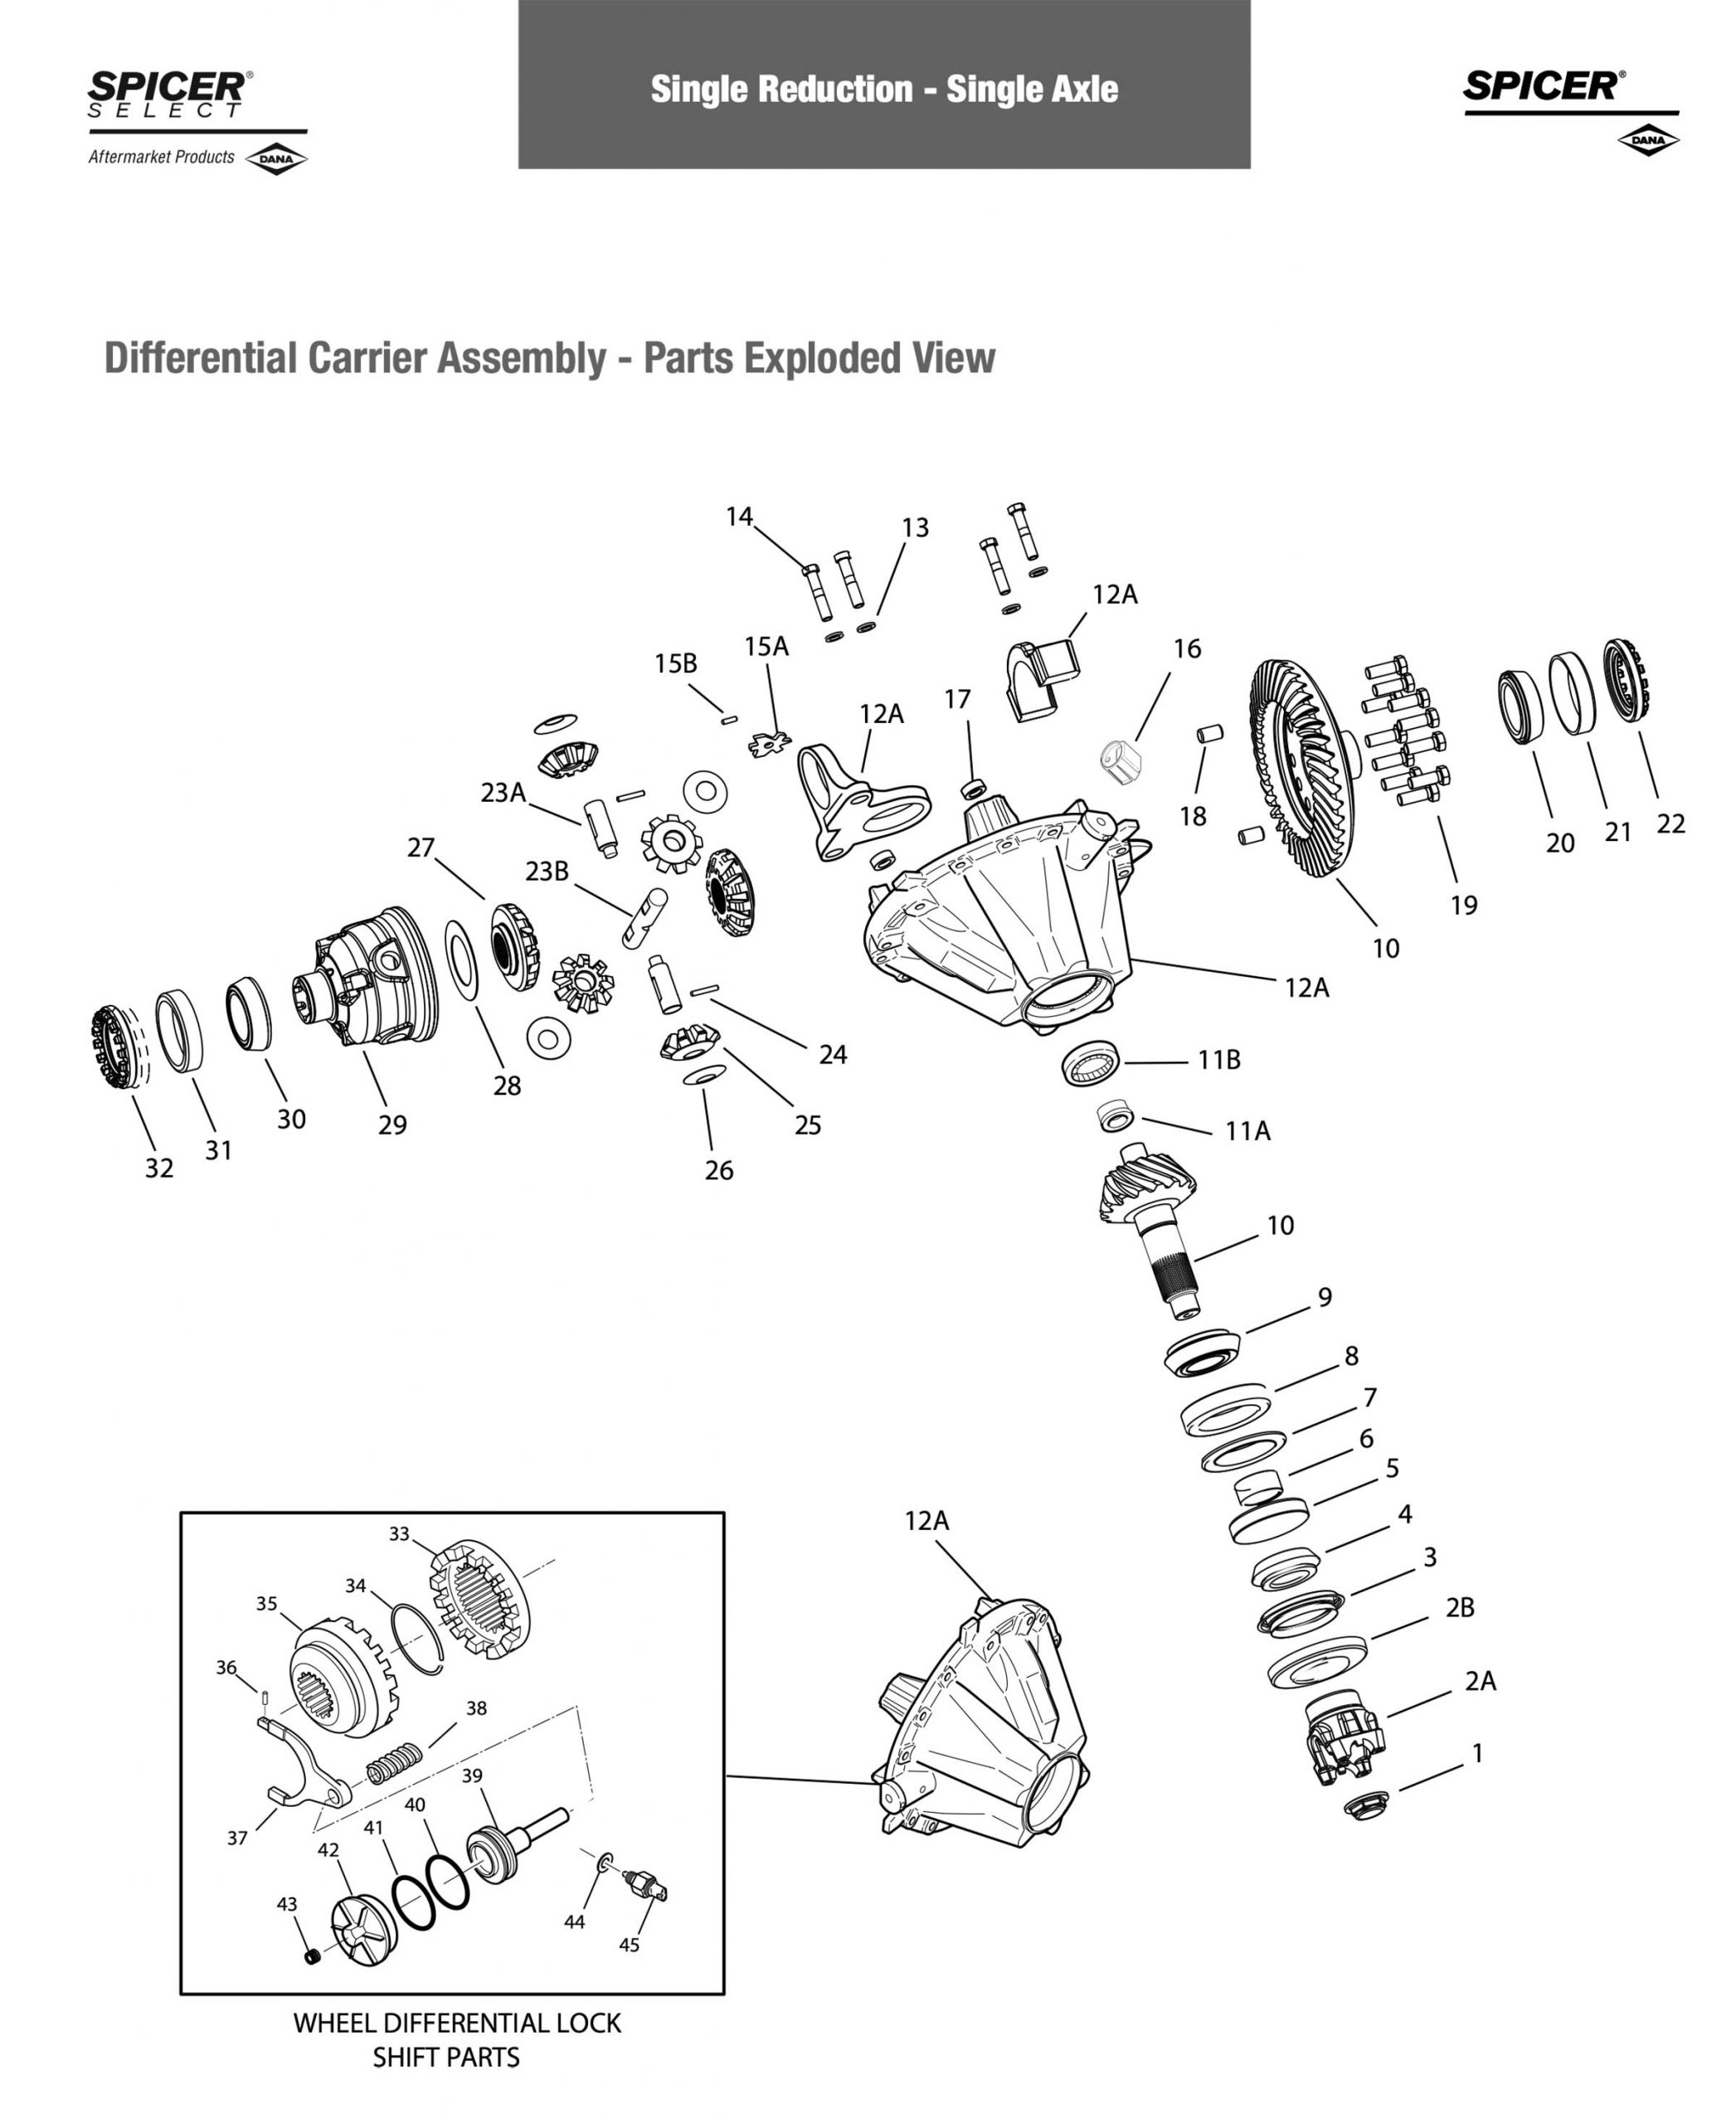 Spicer S110 S135 S150 Exploded View Parts Diagram